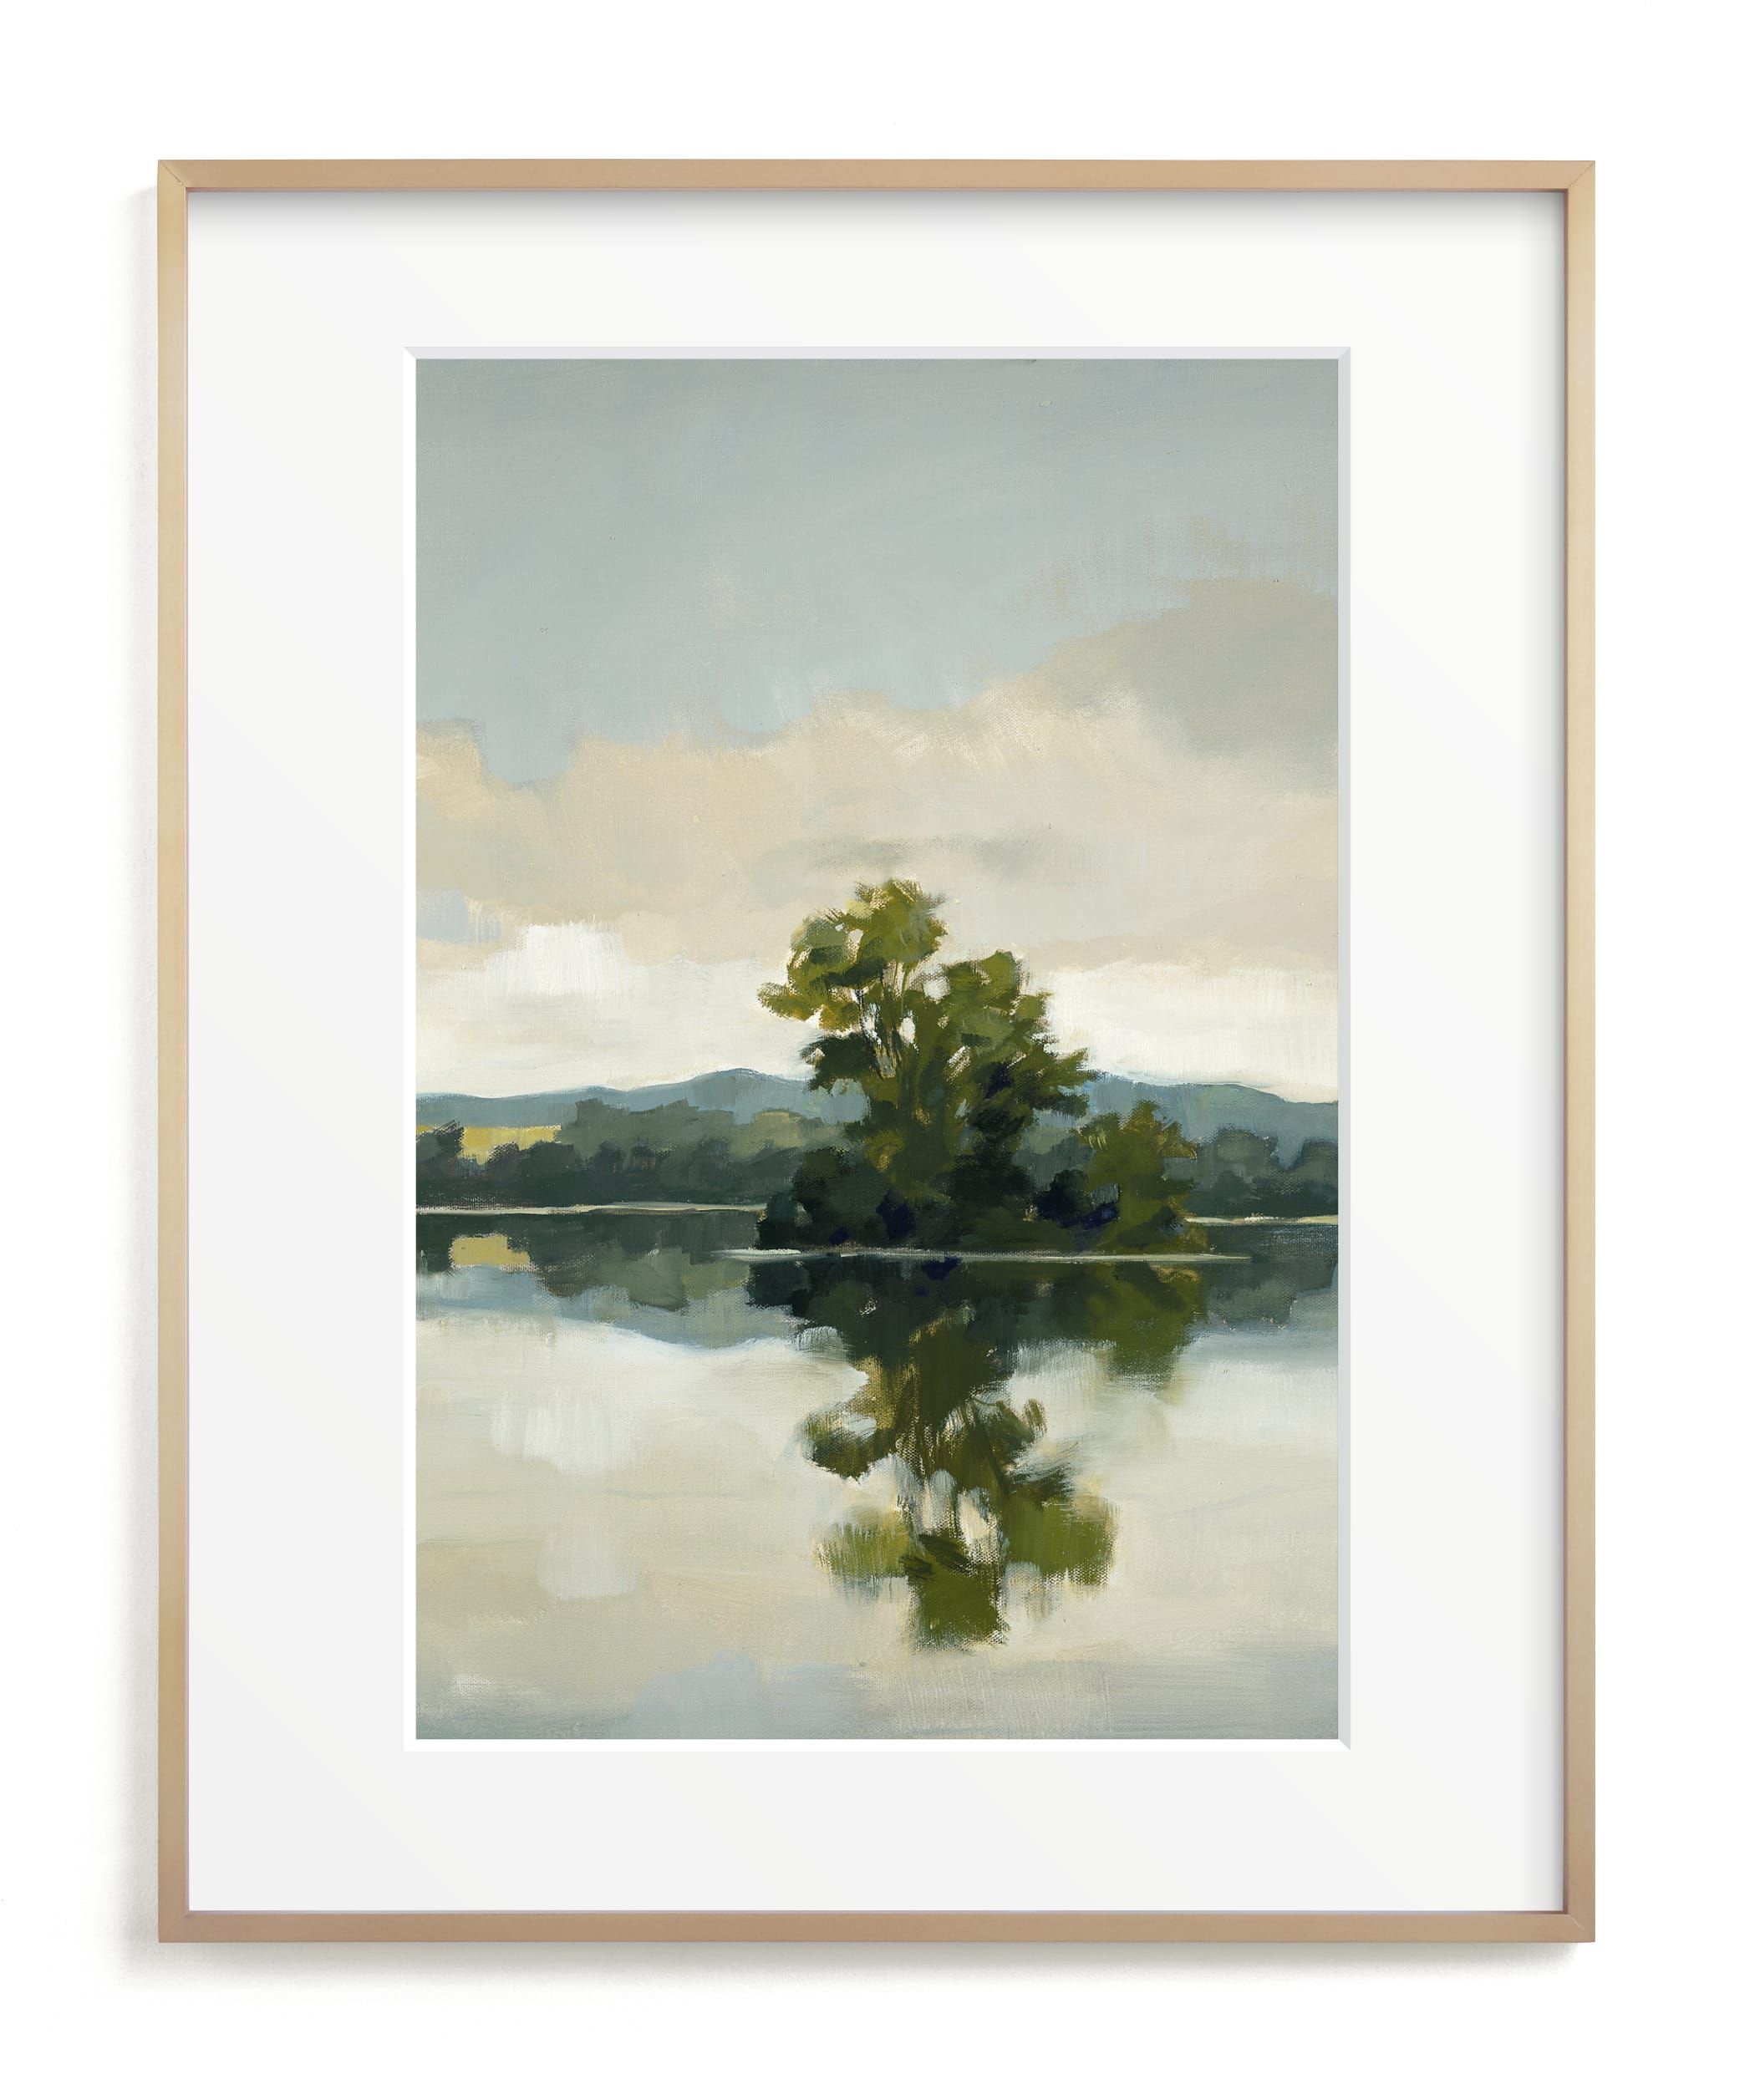 "Tranquil Waters II" - Painting Limited Edition Art Print by Stephanie Goos Johnson. | Minted